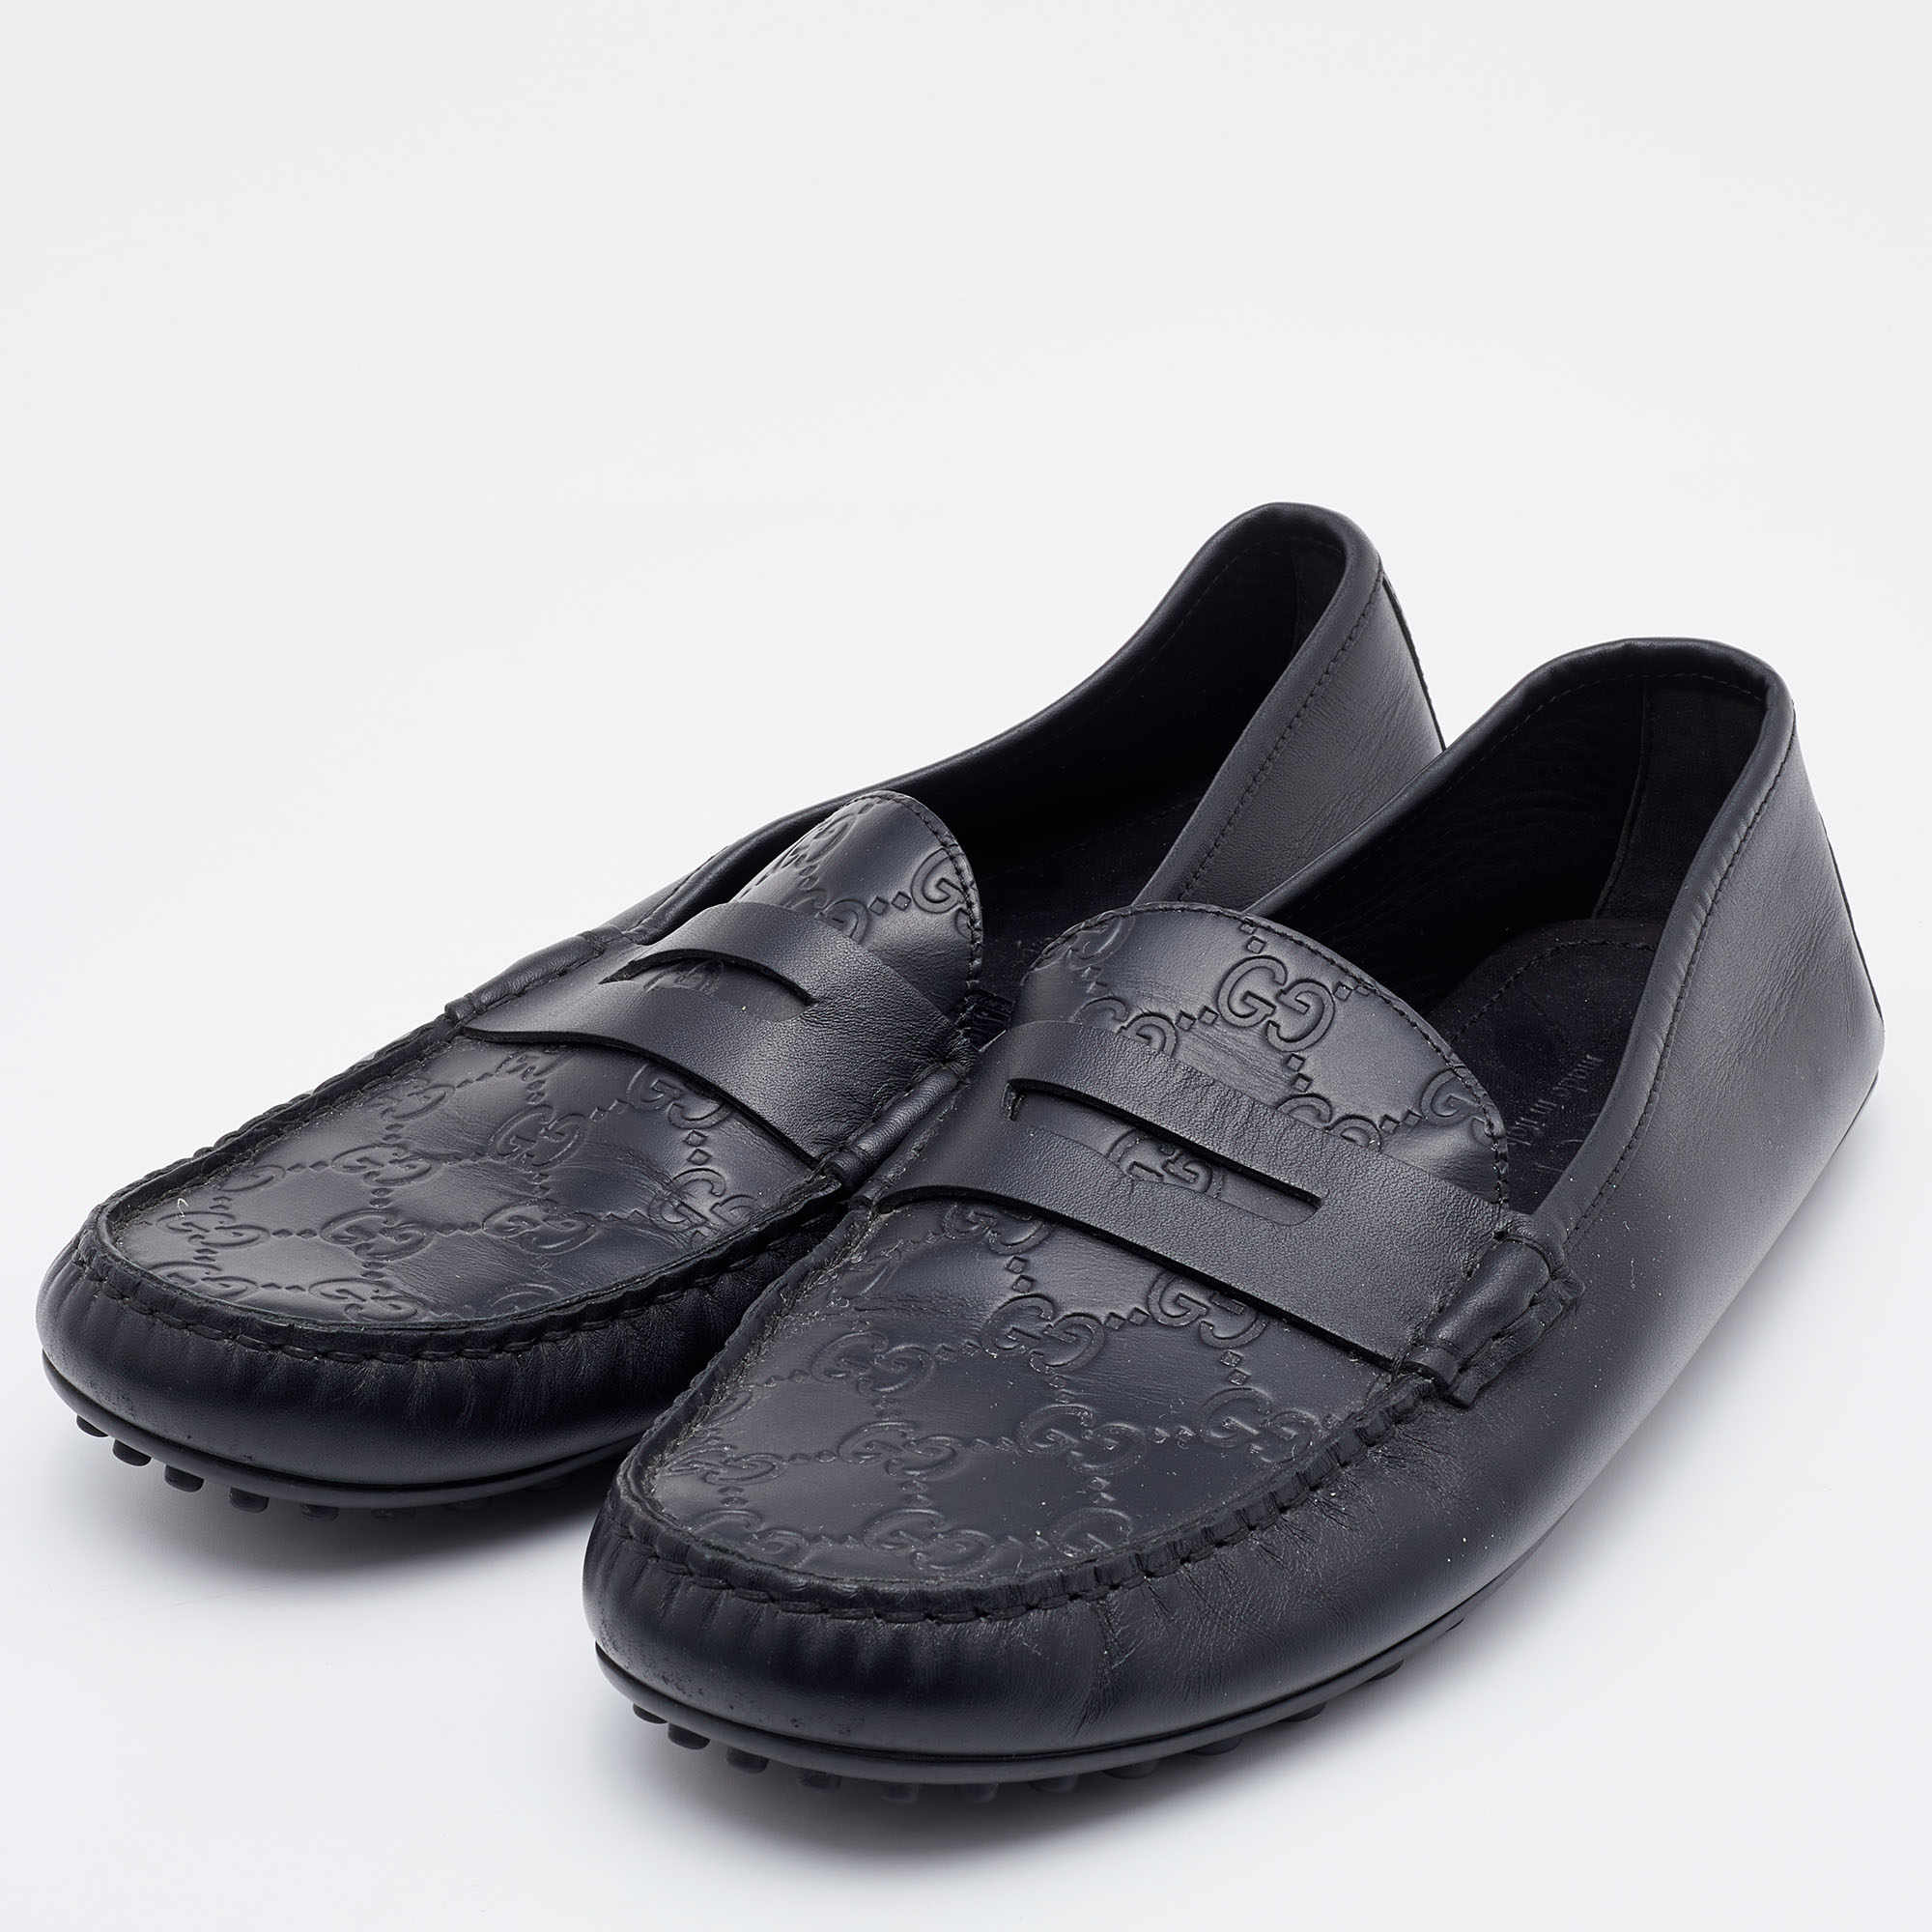 

Gucci Black Guccissima Leather Penny Slip On Loafers Size